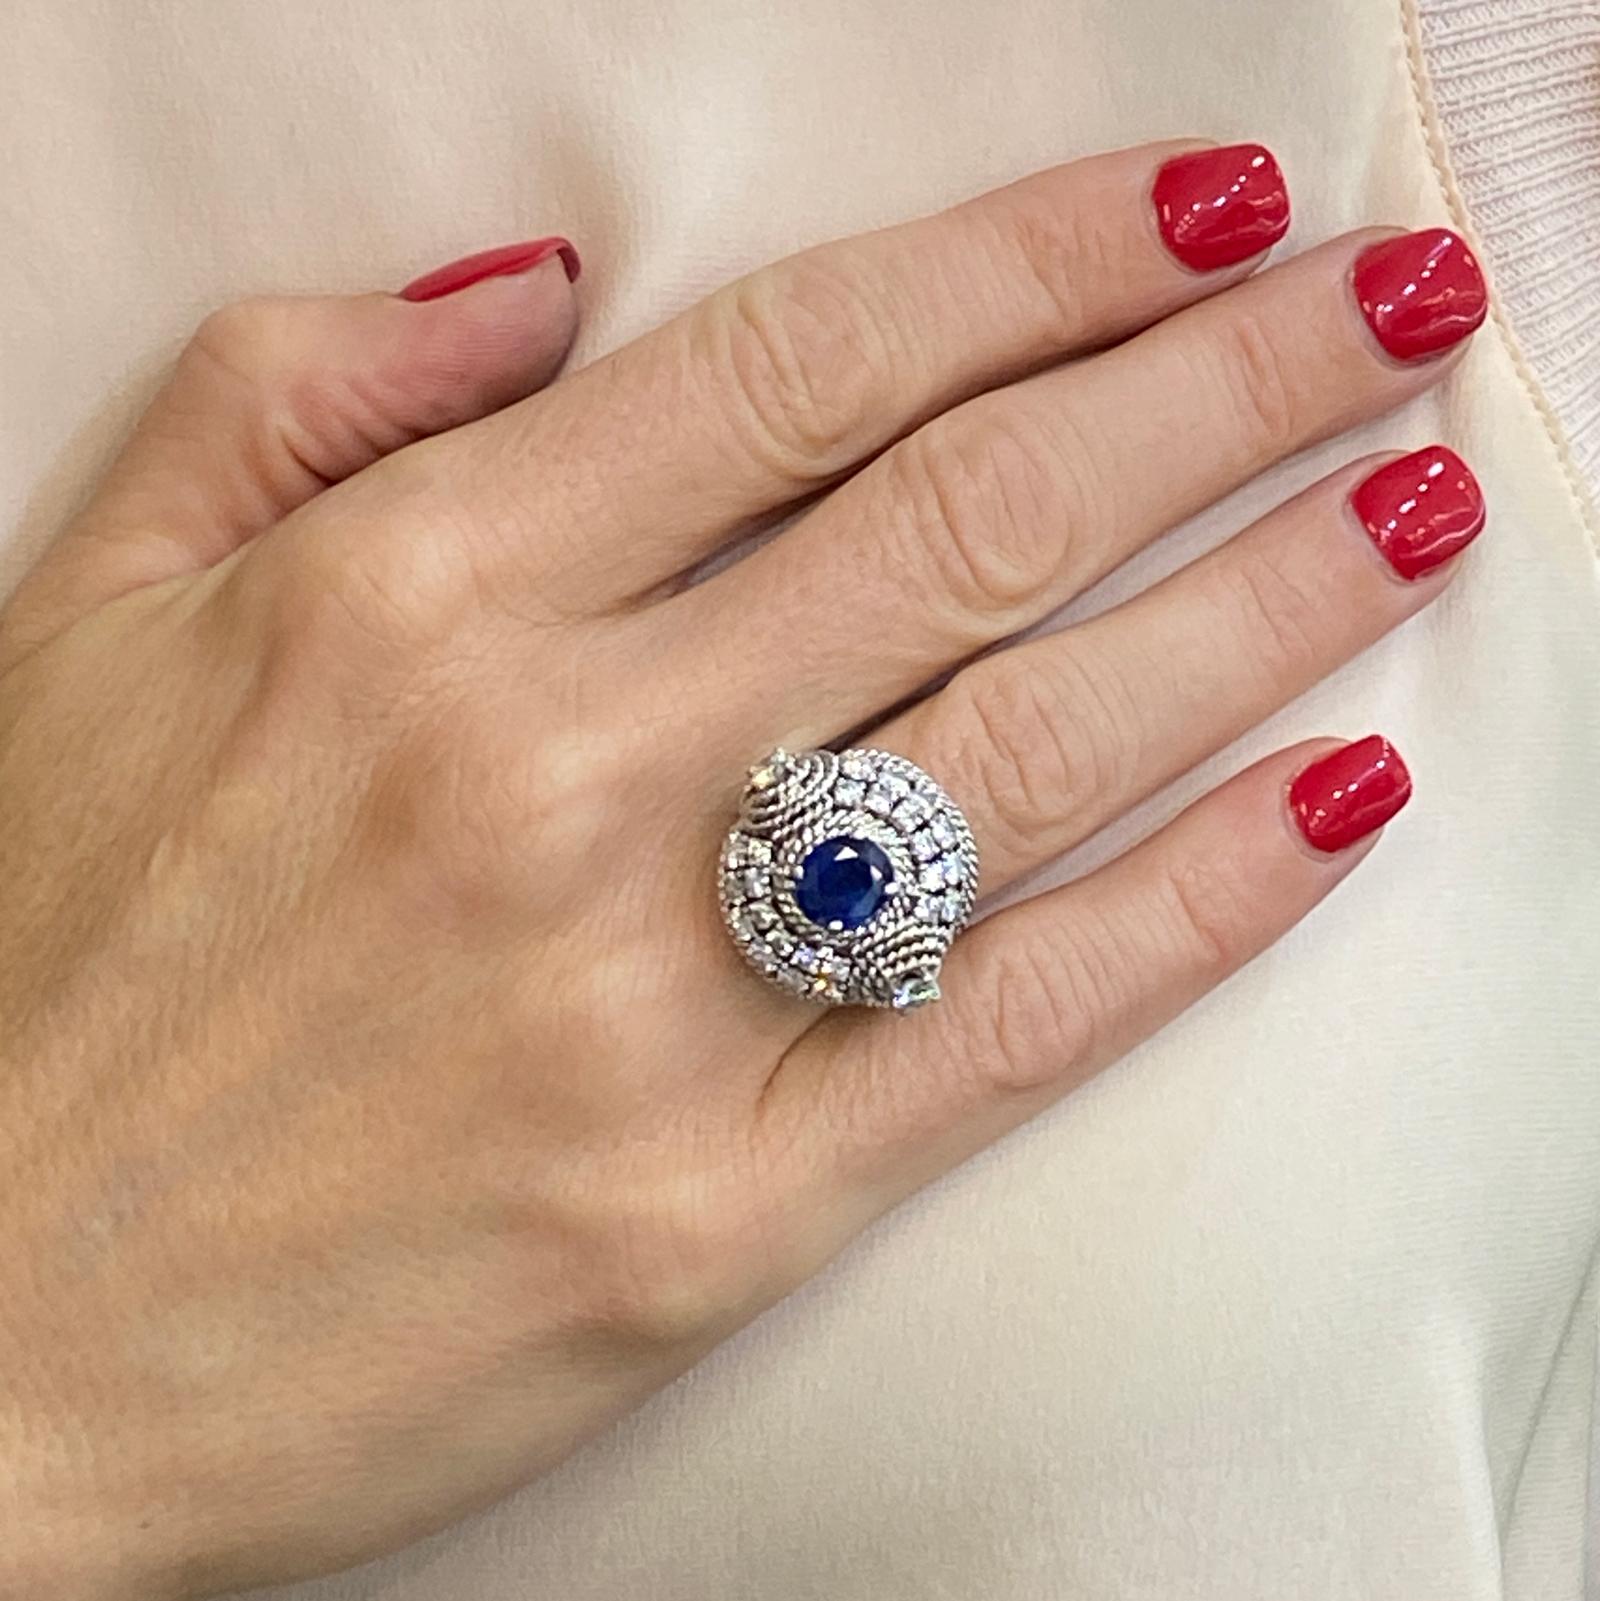 Stunning contemporary diamond sapphire round cocktail ring. This statement ring features a center 2.00-carat blue sapphire surrounded by 2.00-carats round briliant cut diamonds.  The diamonds are all H-I color and VS2-SI2 clarity. The dome shaped